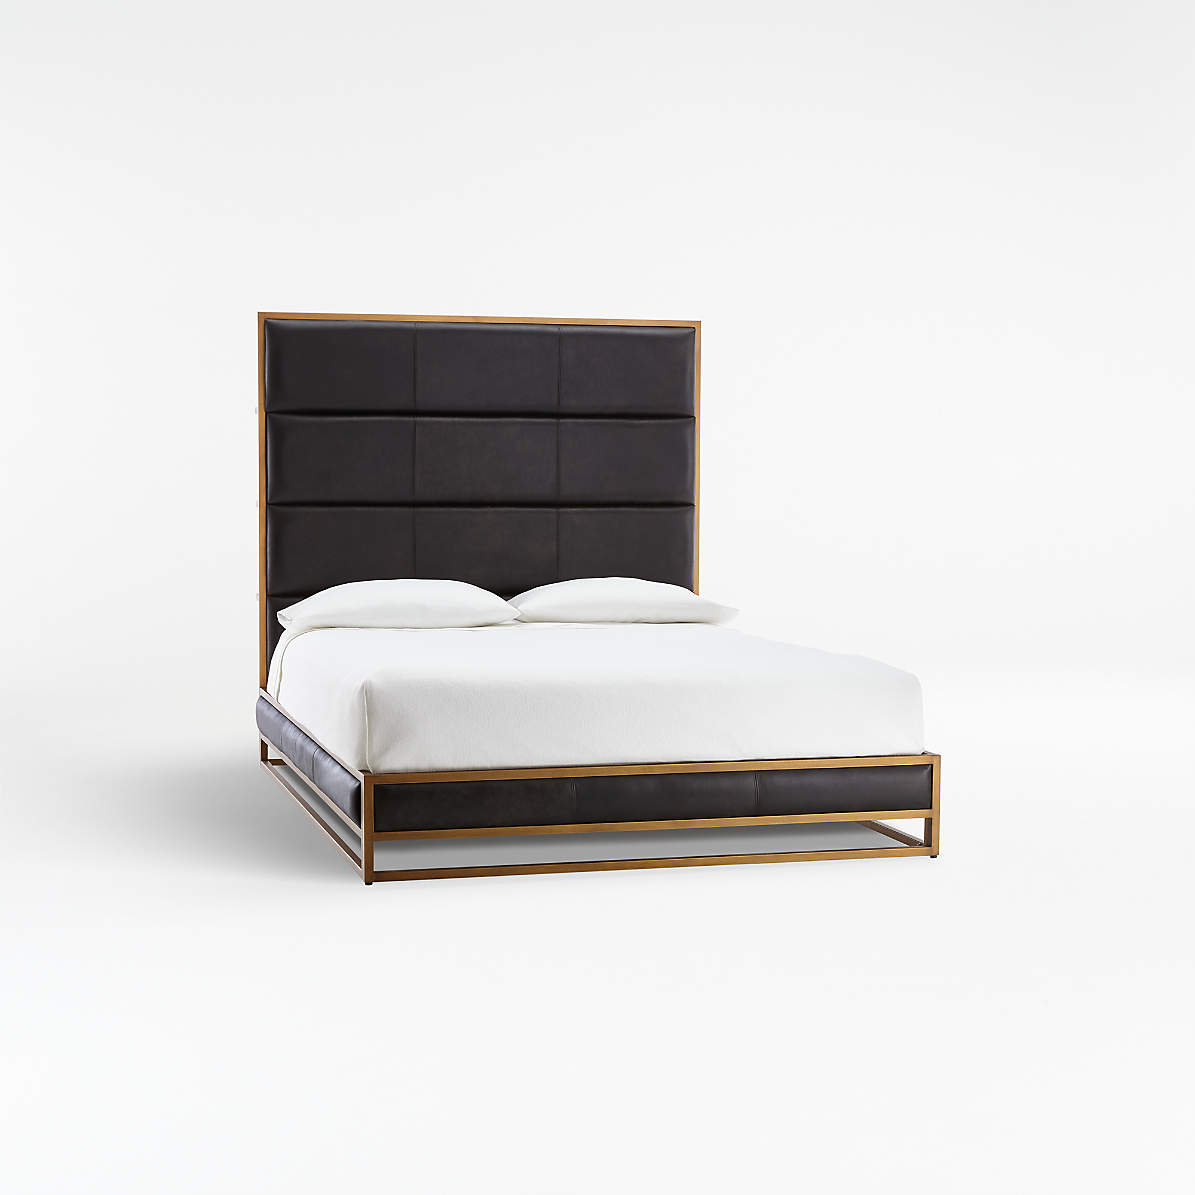 Oxford Leather Bed Crate And Barrel, Leather Queen Size Bed